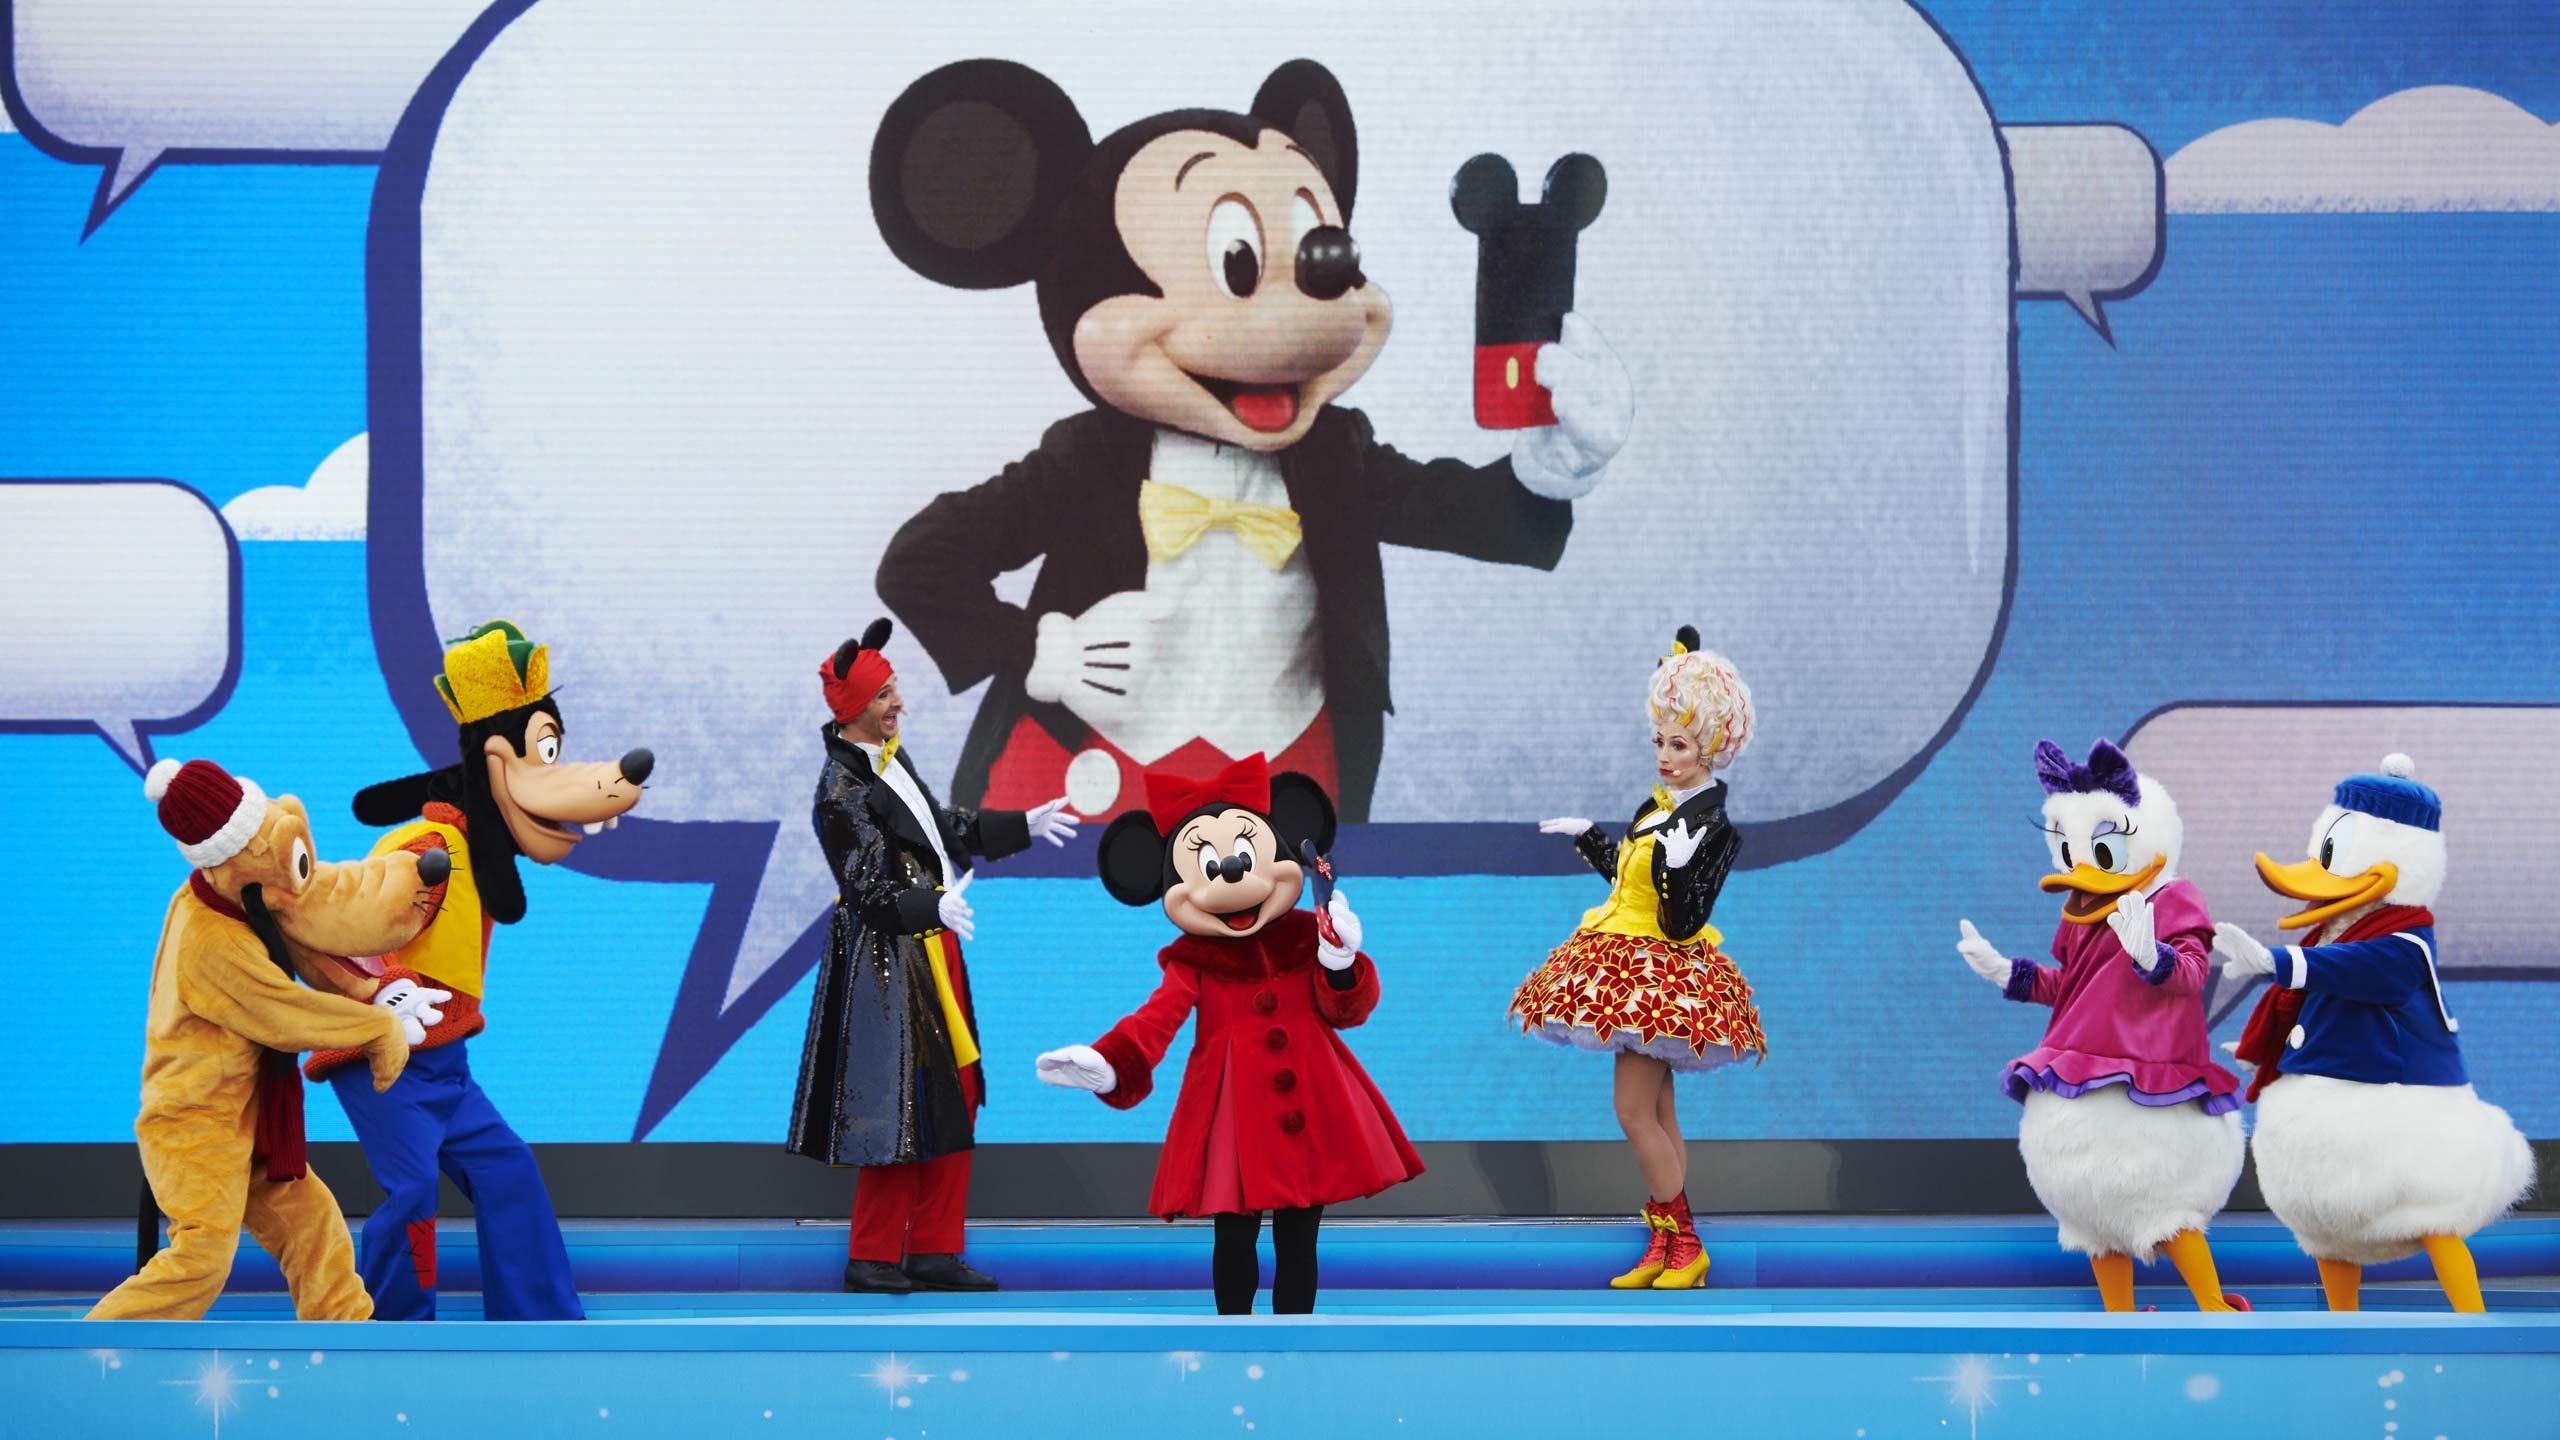 Image of #SURPRISEMICKEY CHRISTMAS SPECIAL